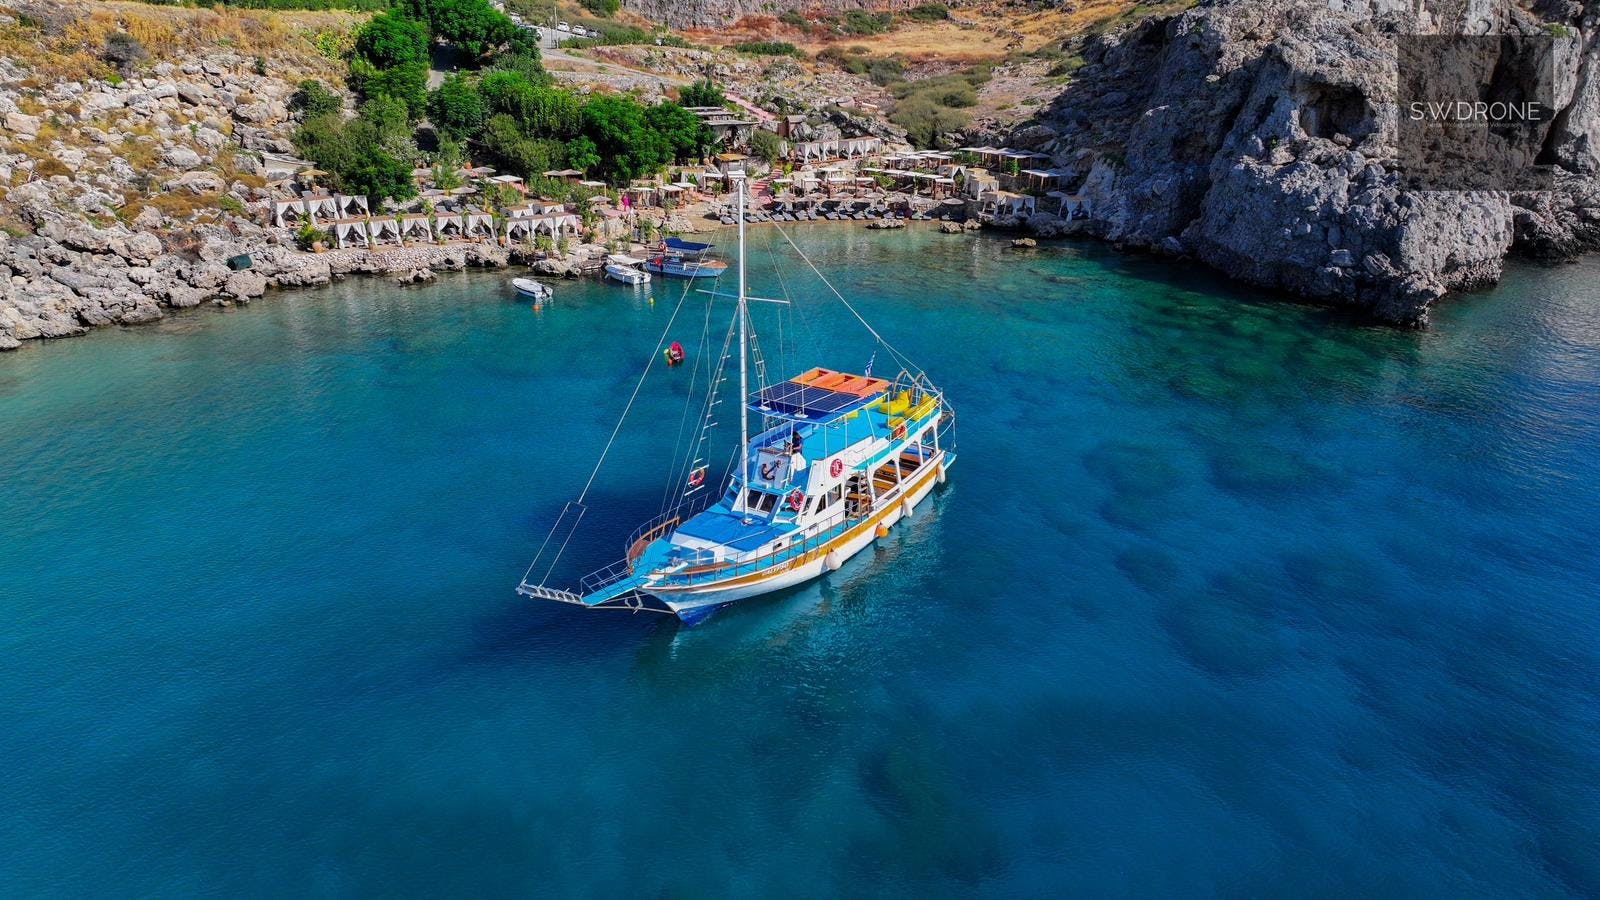 Lindos full-day cruise experience with lunch and snorkeling